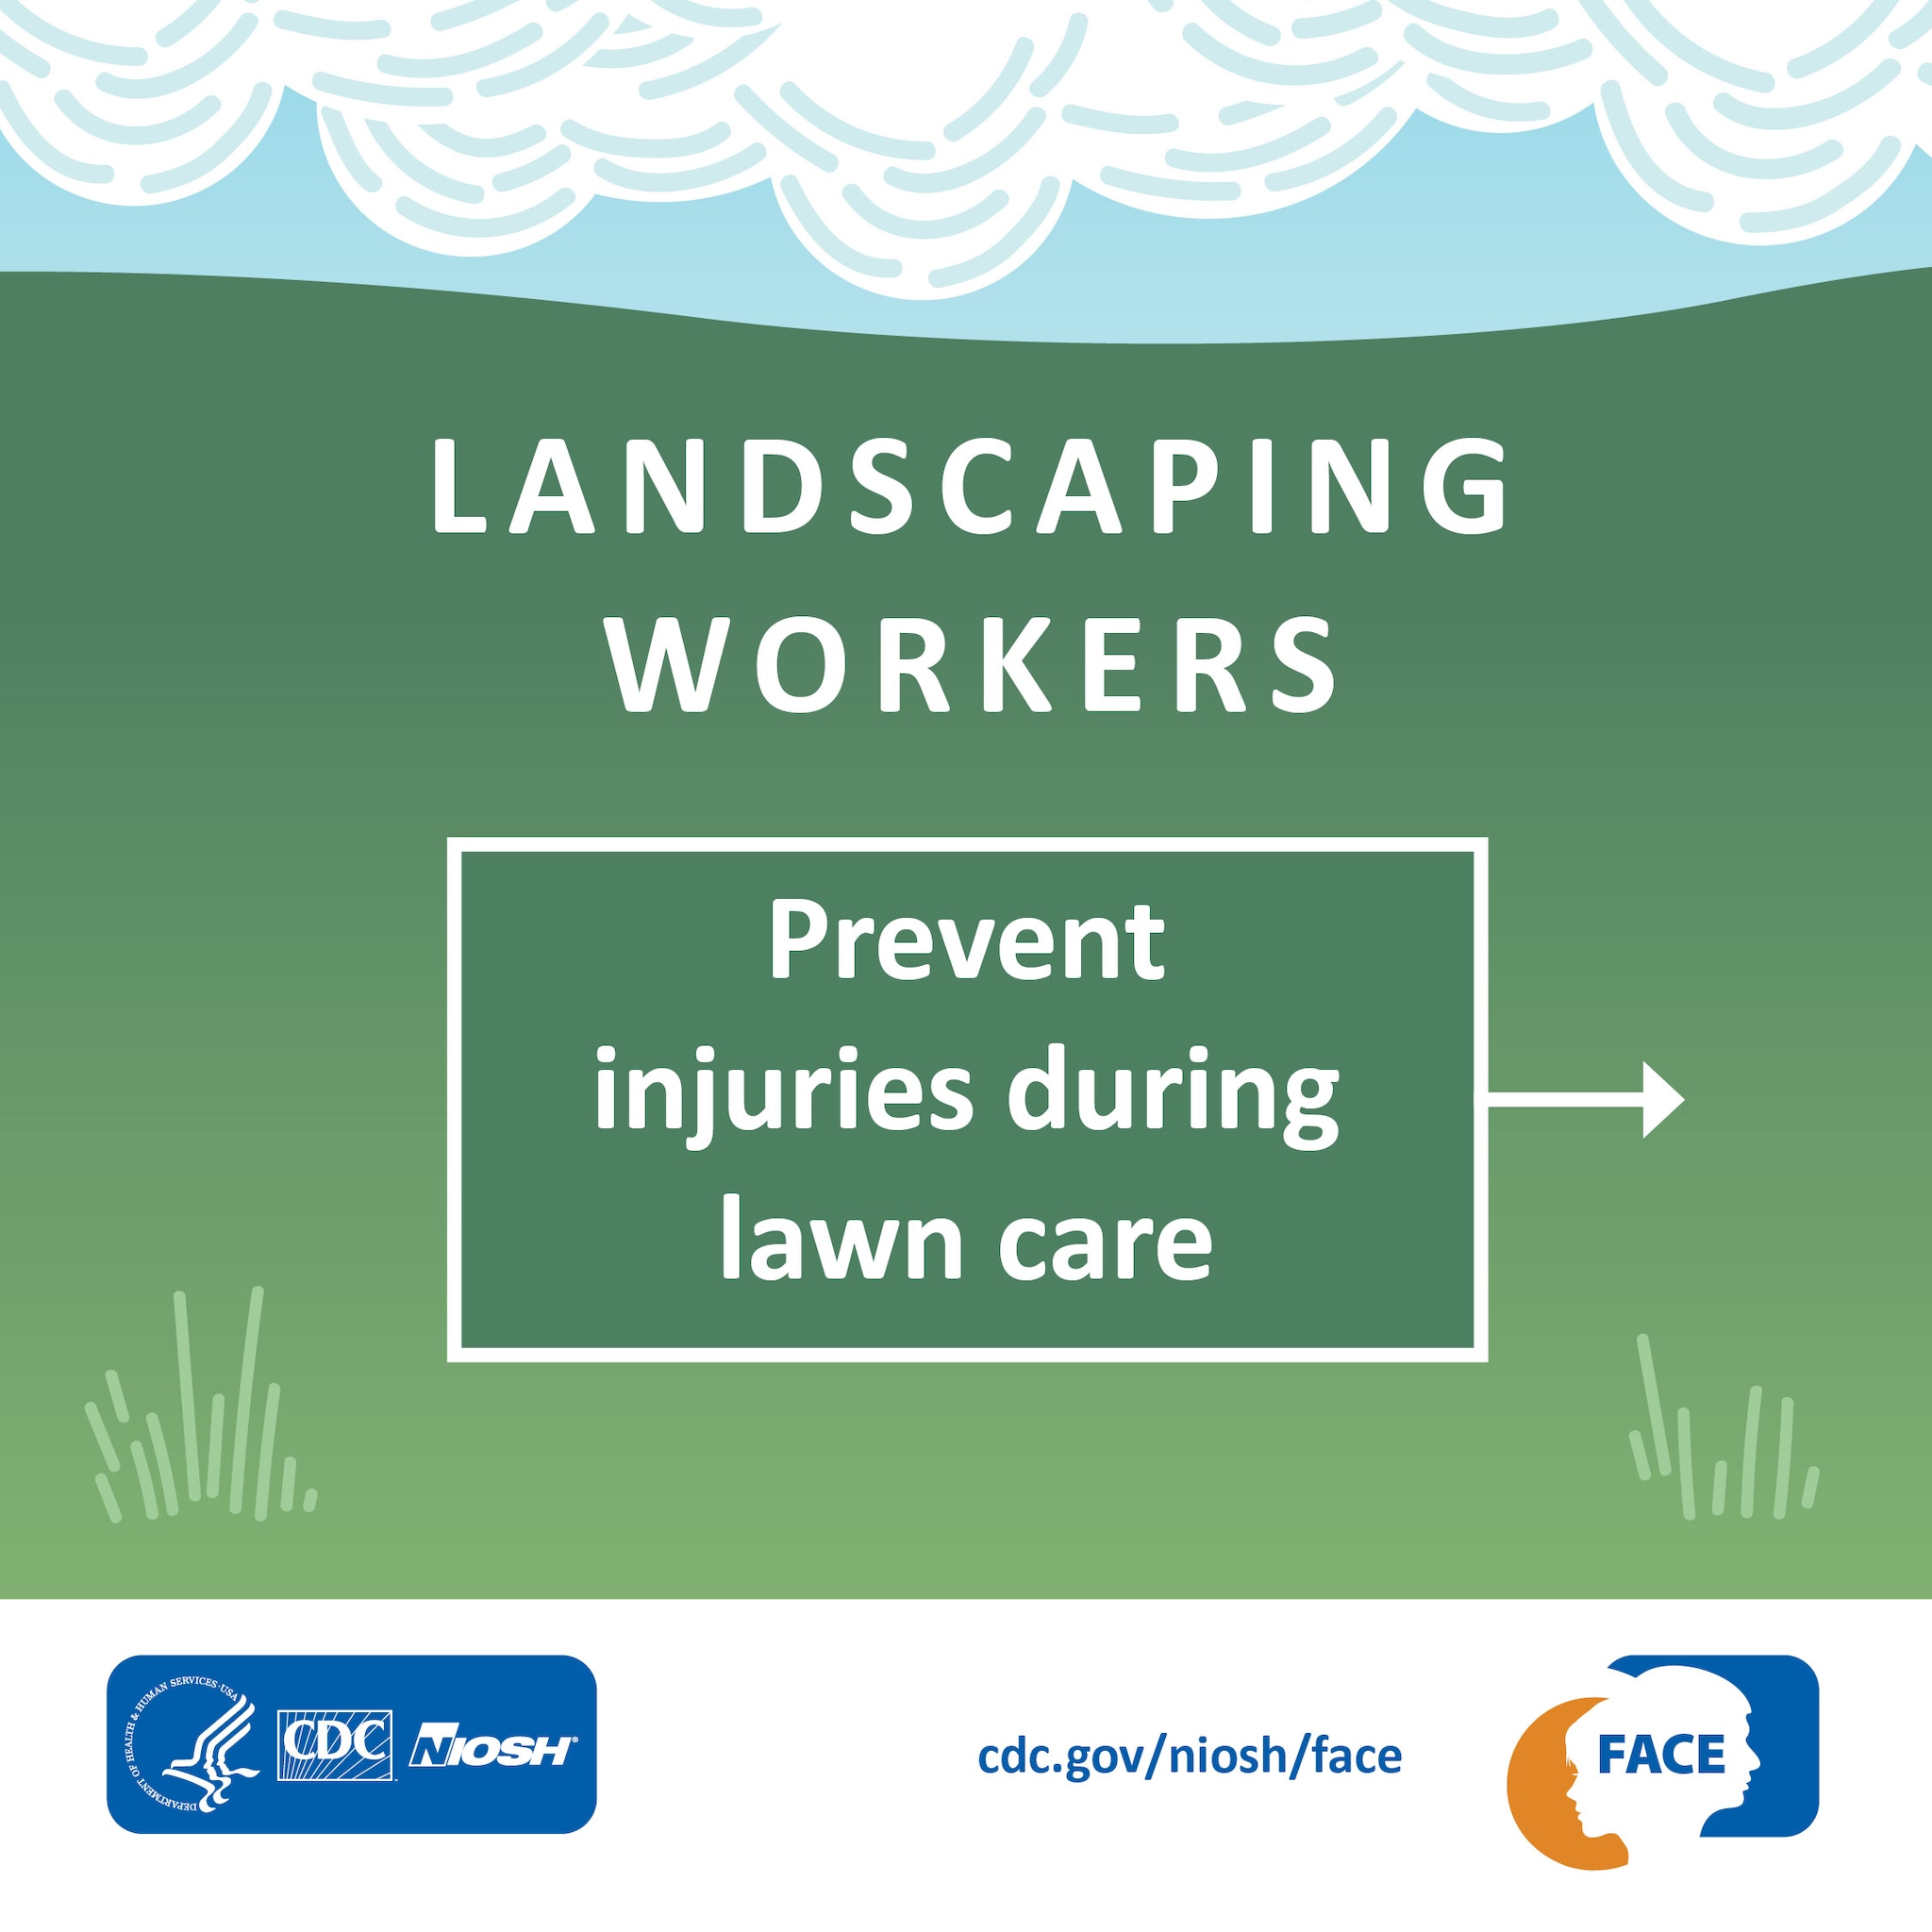 Landscaping Workers: Prevent injuries during lawn care